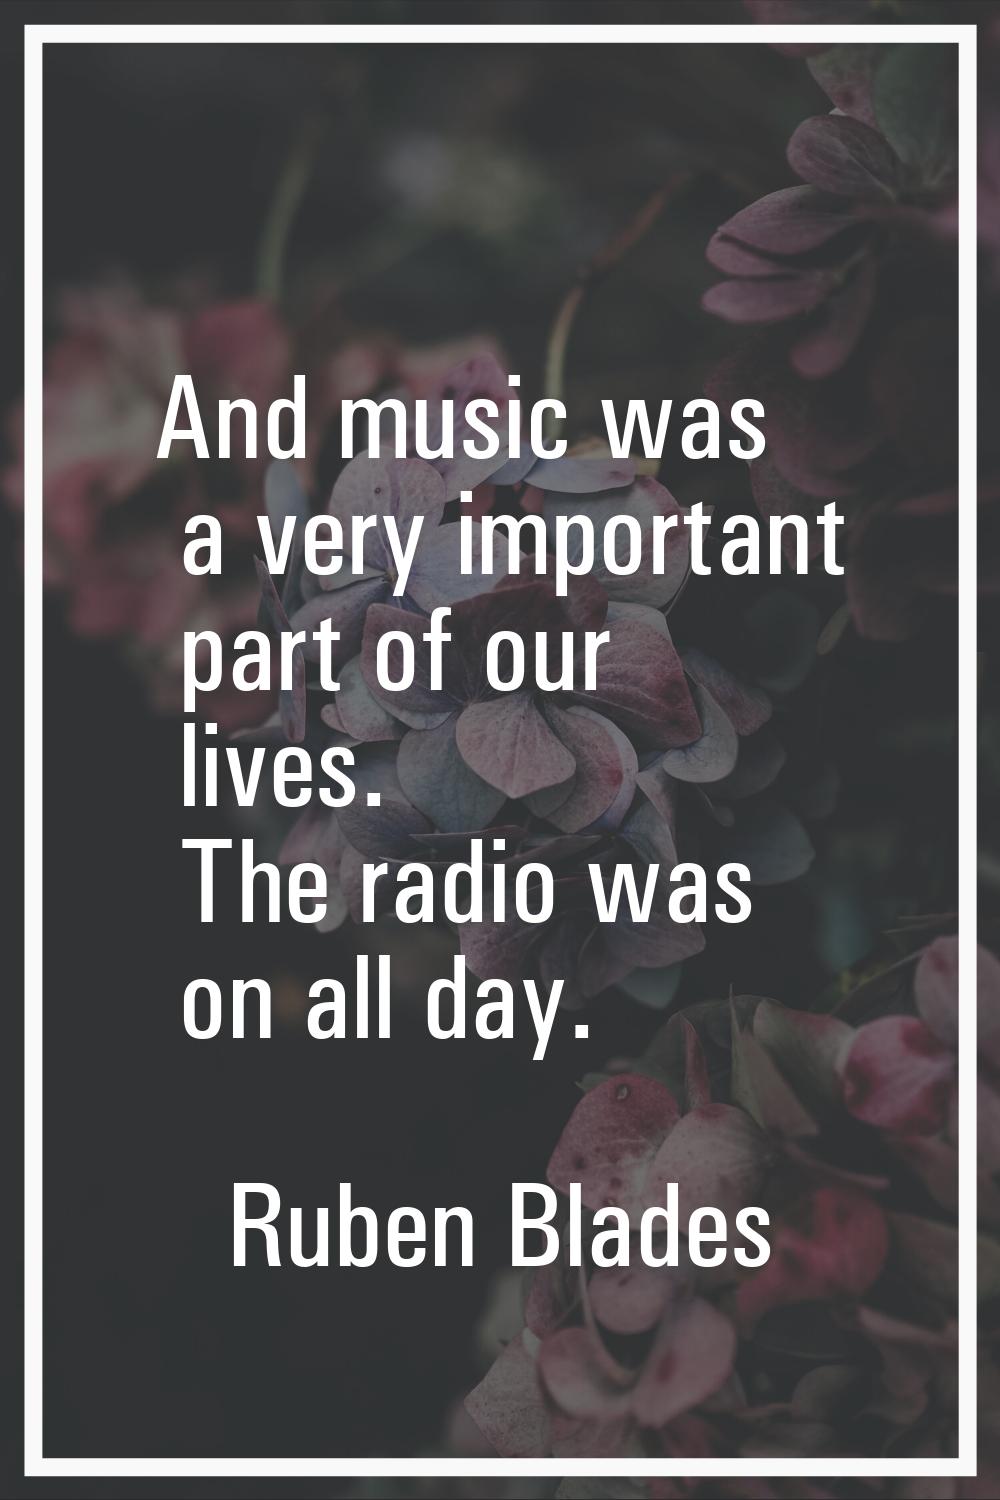 And music was a very important part of our lives. The radio was on all day.